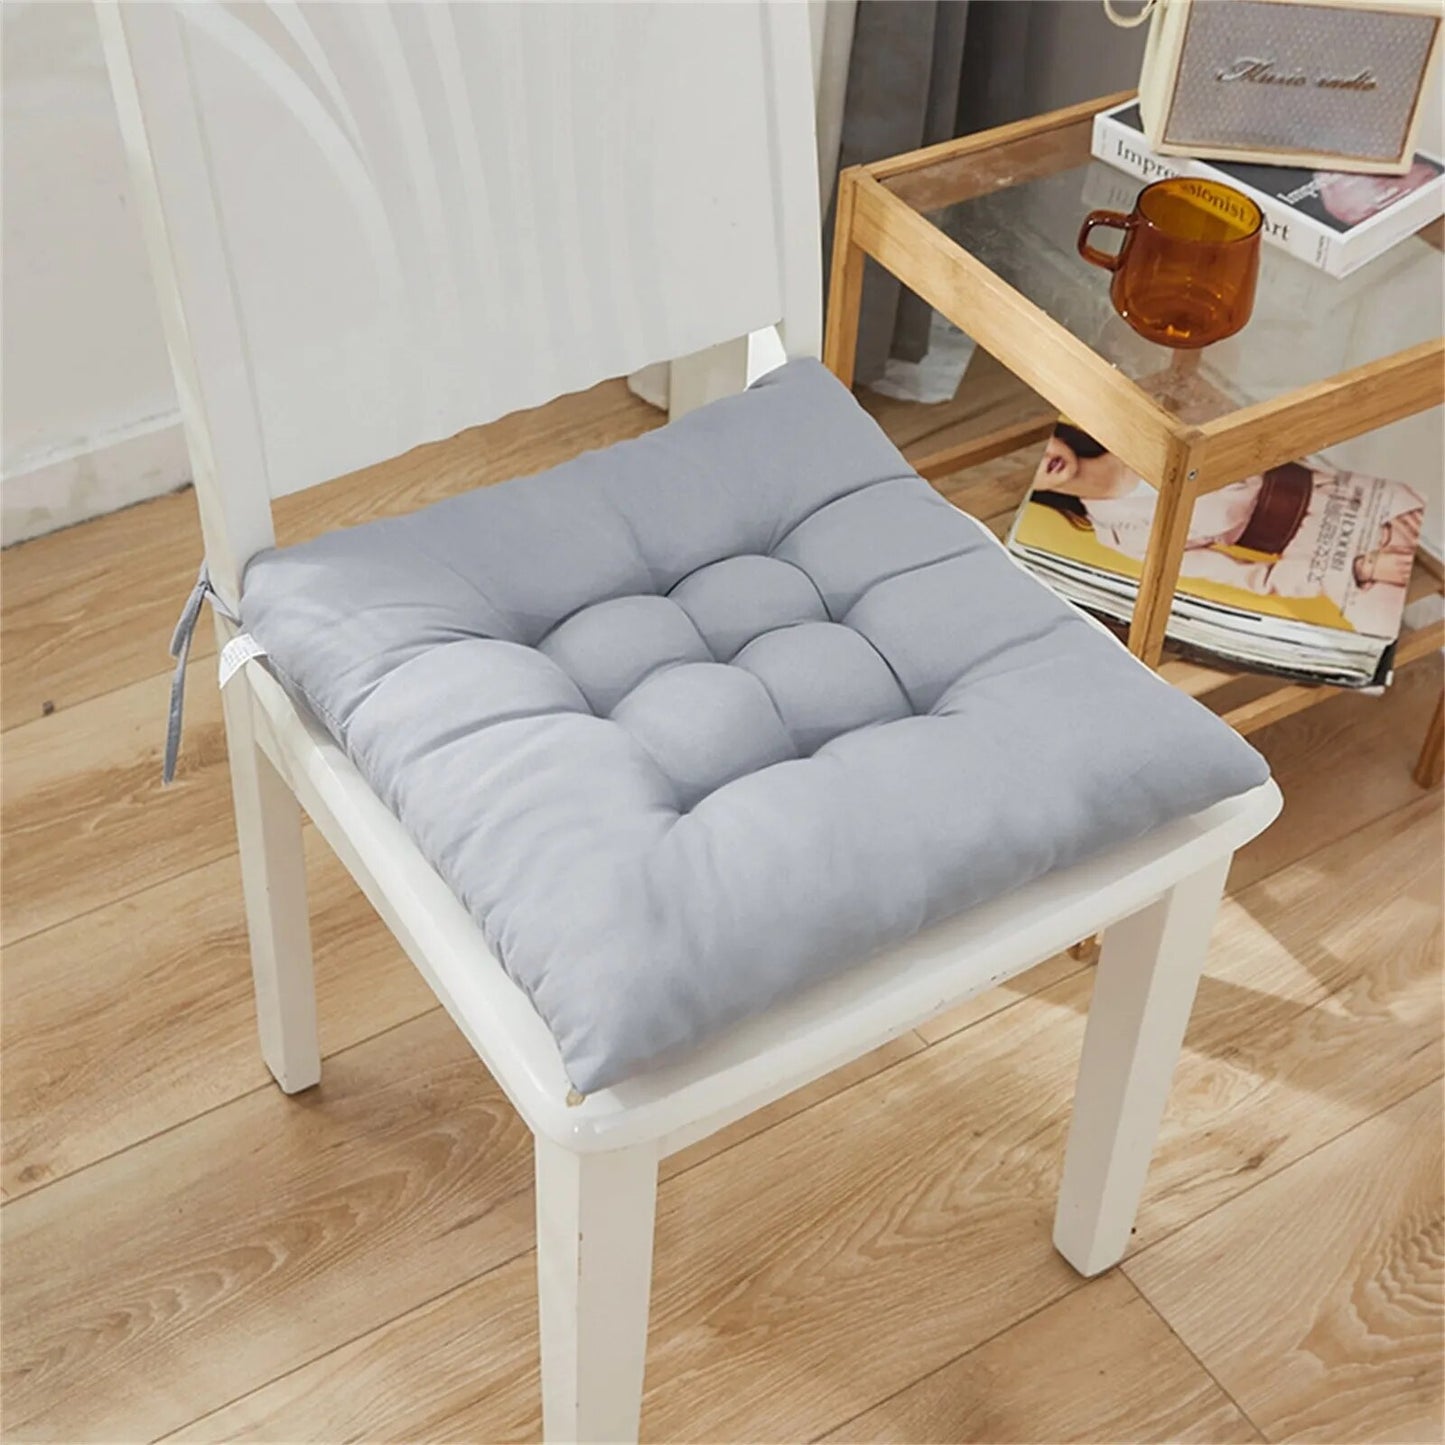 Square Chair Soft Pad Thicker Seat Cushion For Dining Patio Home Office Indoor Outdoor Garden Sofa Buttocks Cushion With Strap